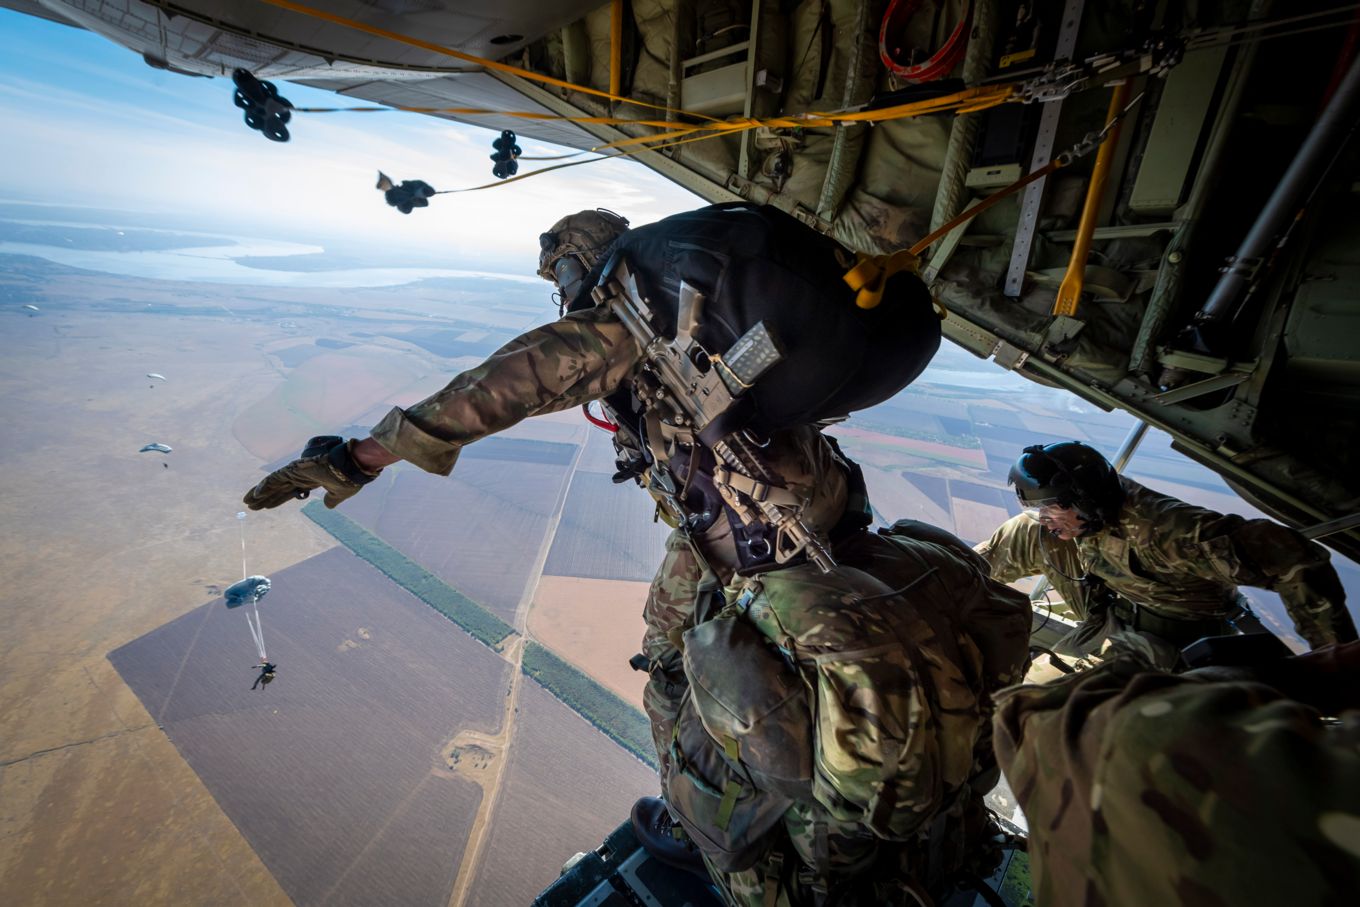 A British Paratrooper from 16 Air Assault Brigade, prepares to jump from a C-130J Hercules